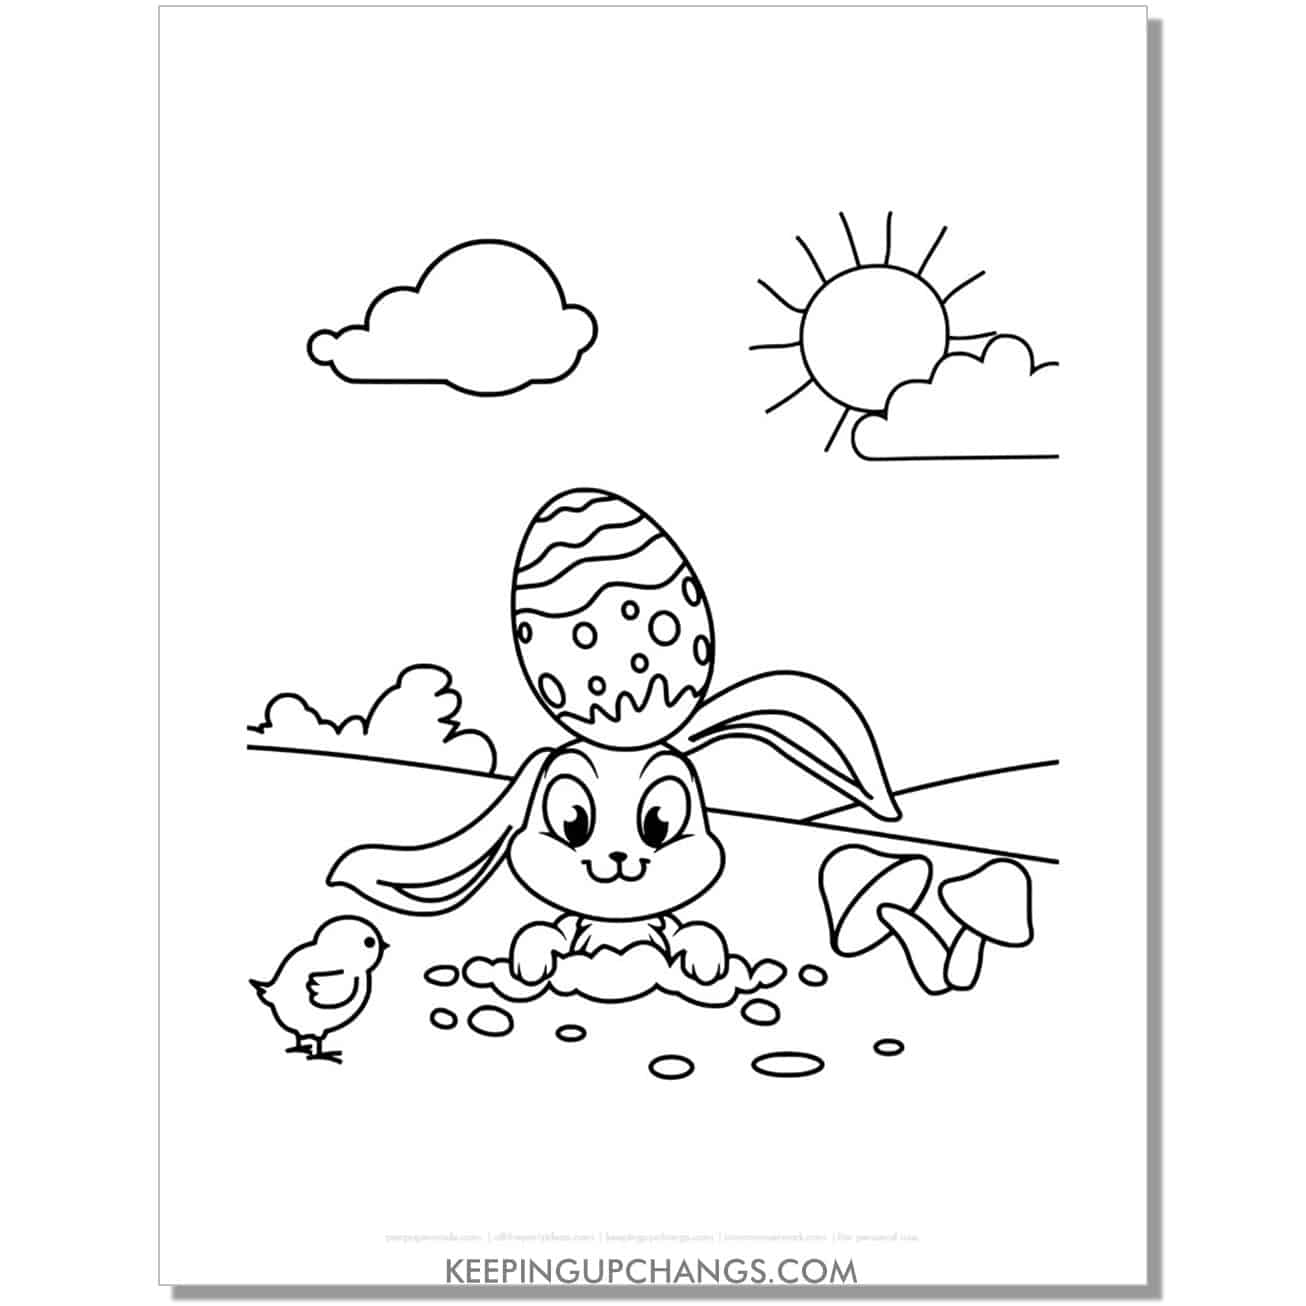 cute easter bunny popping up from ground coloring page, sheet.